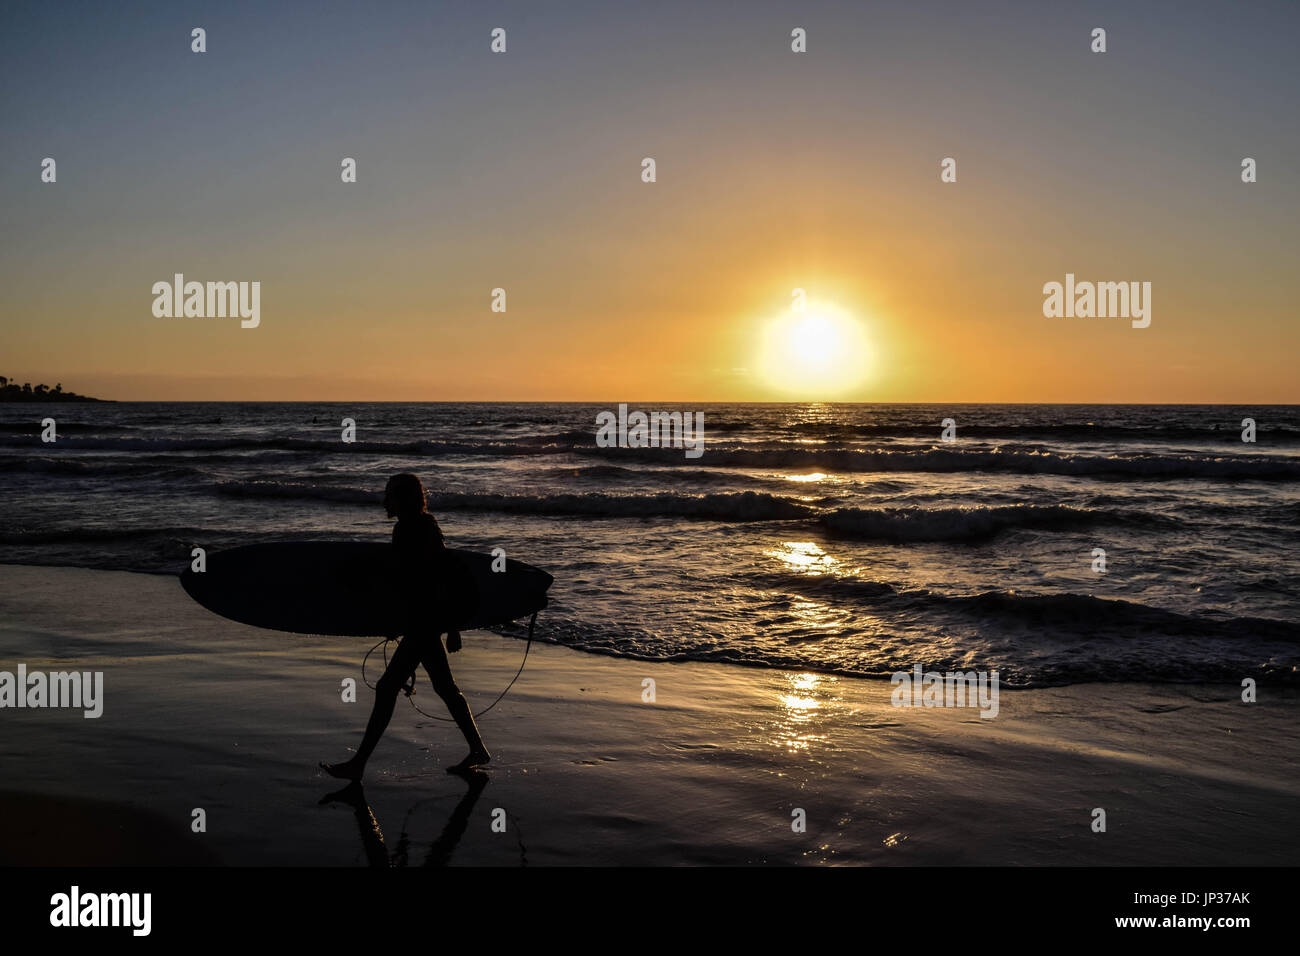 Surfer in southern California Stock Photo